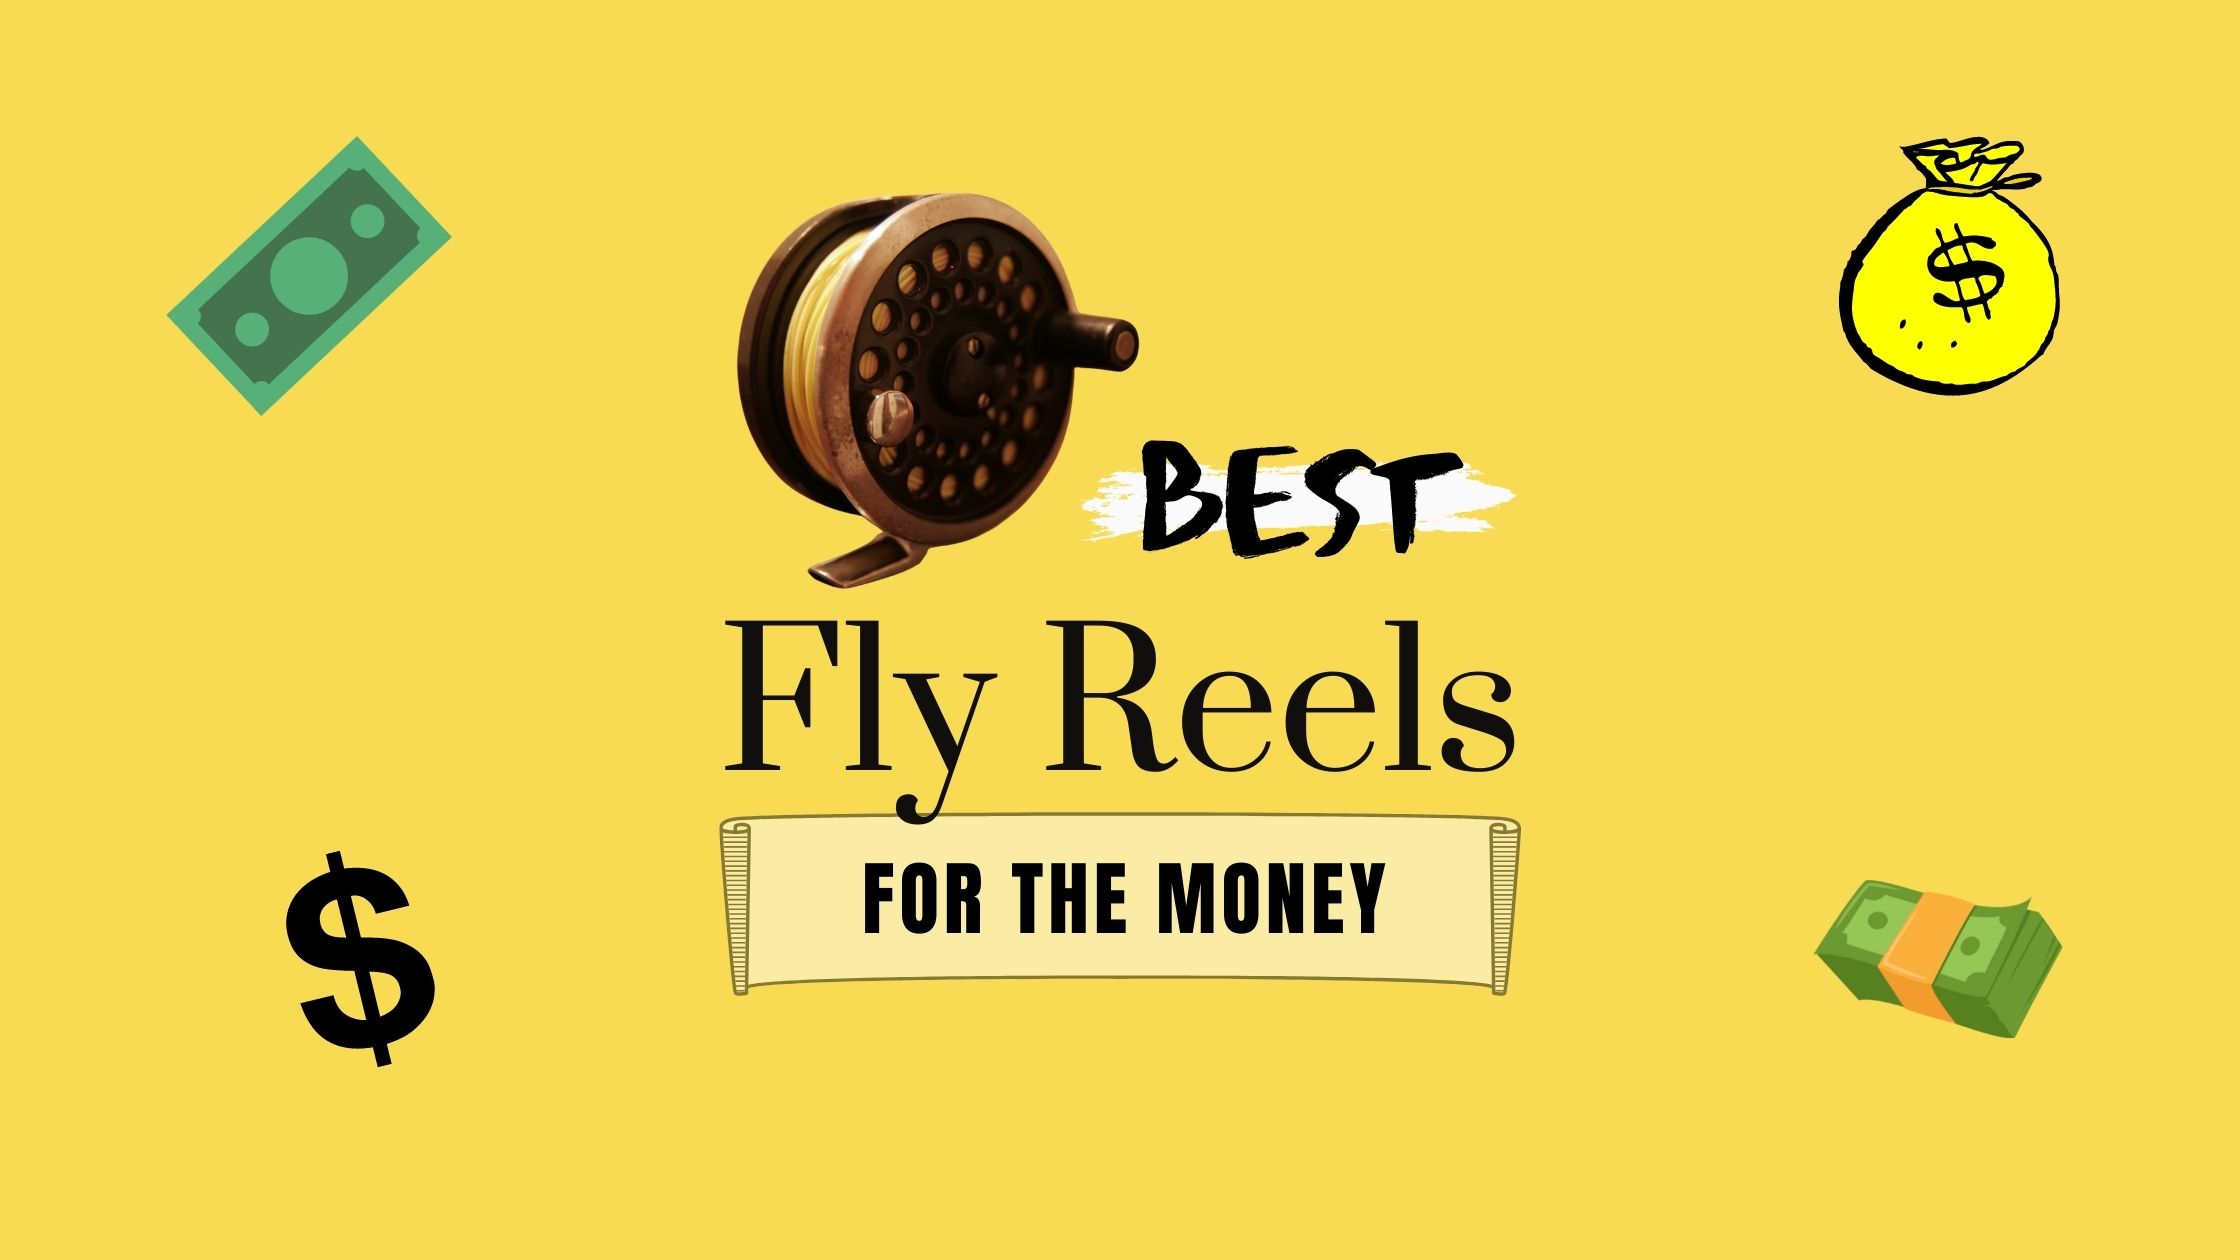 7 Best Fly Reels For Money That You Need To Buy